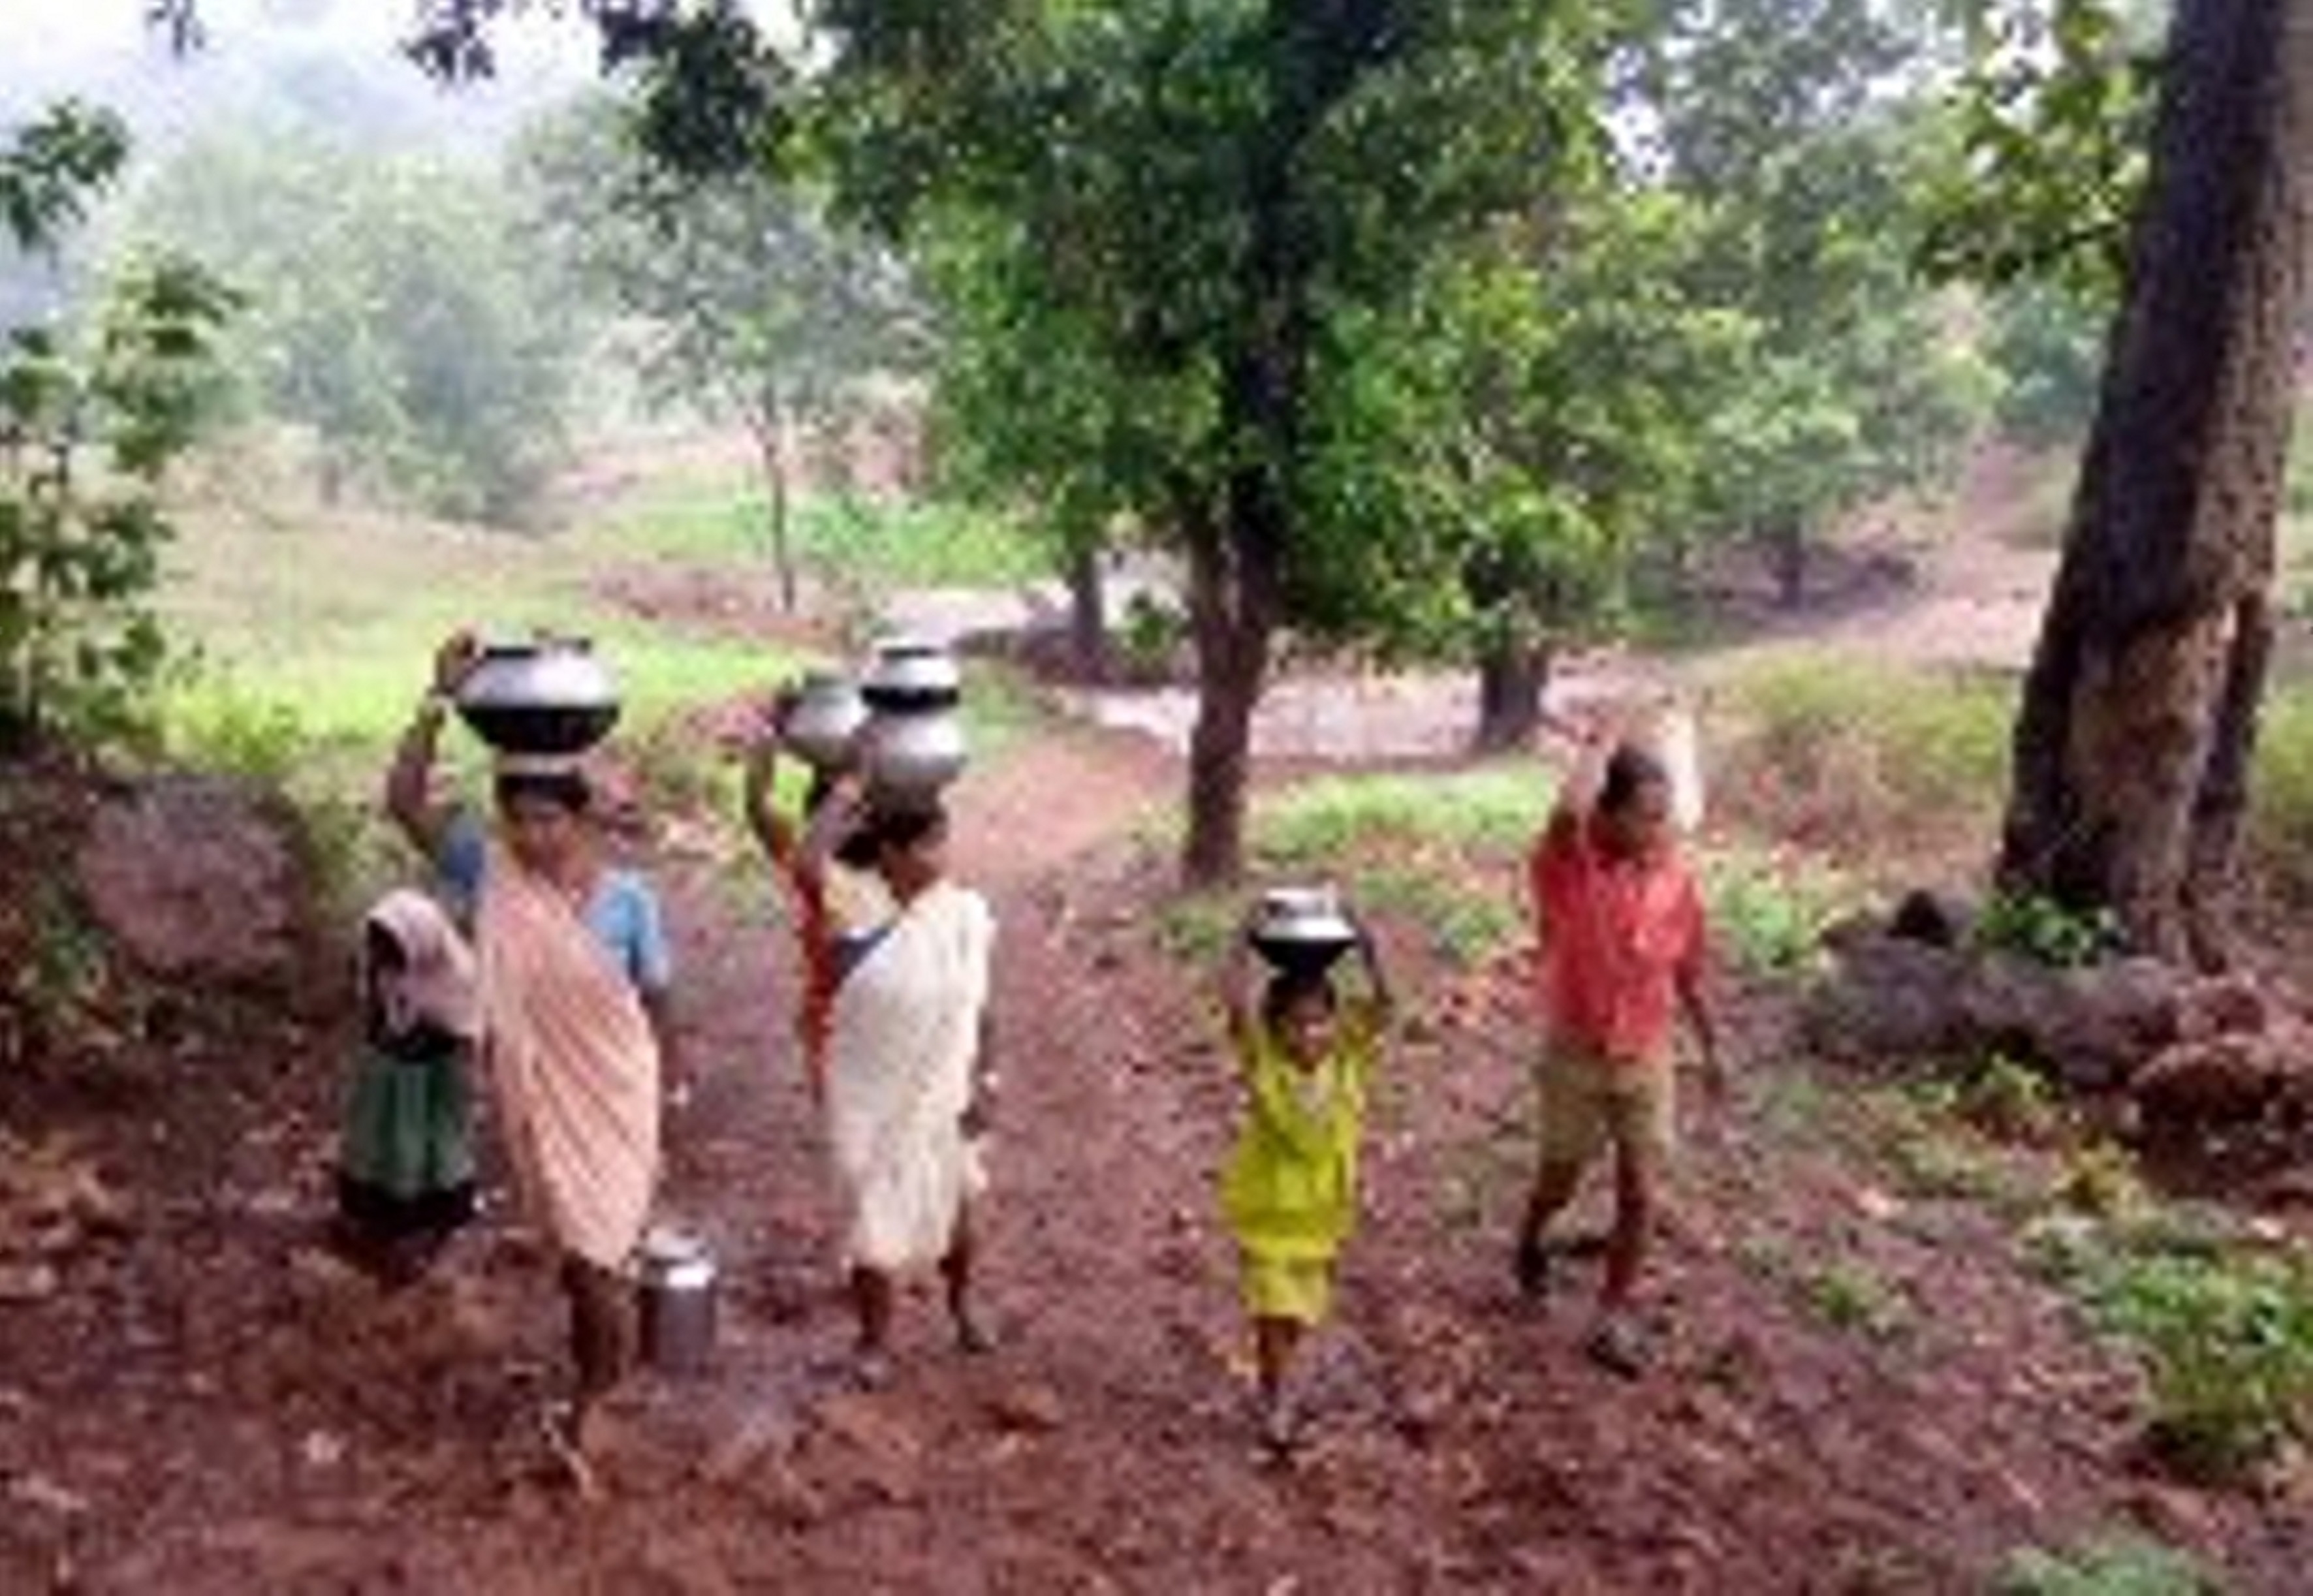 There is no hand pump or well in the village, villagers drink water from Jhiriya